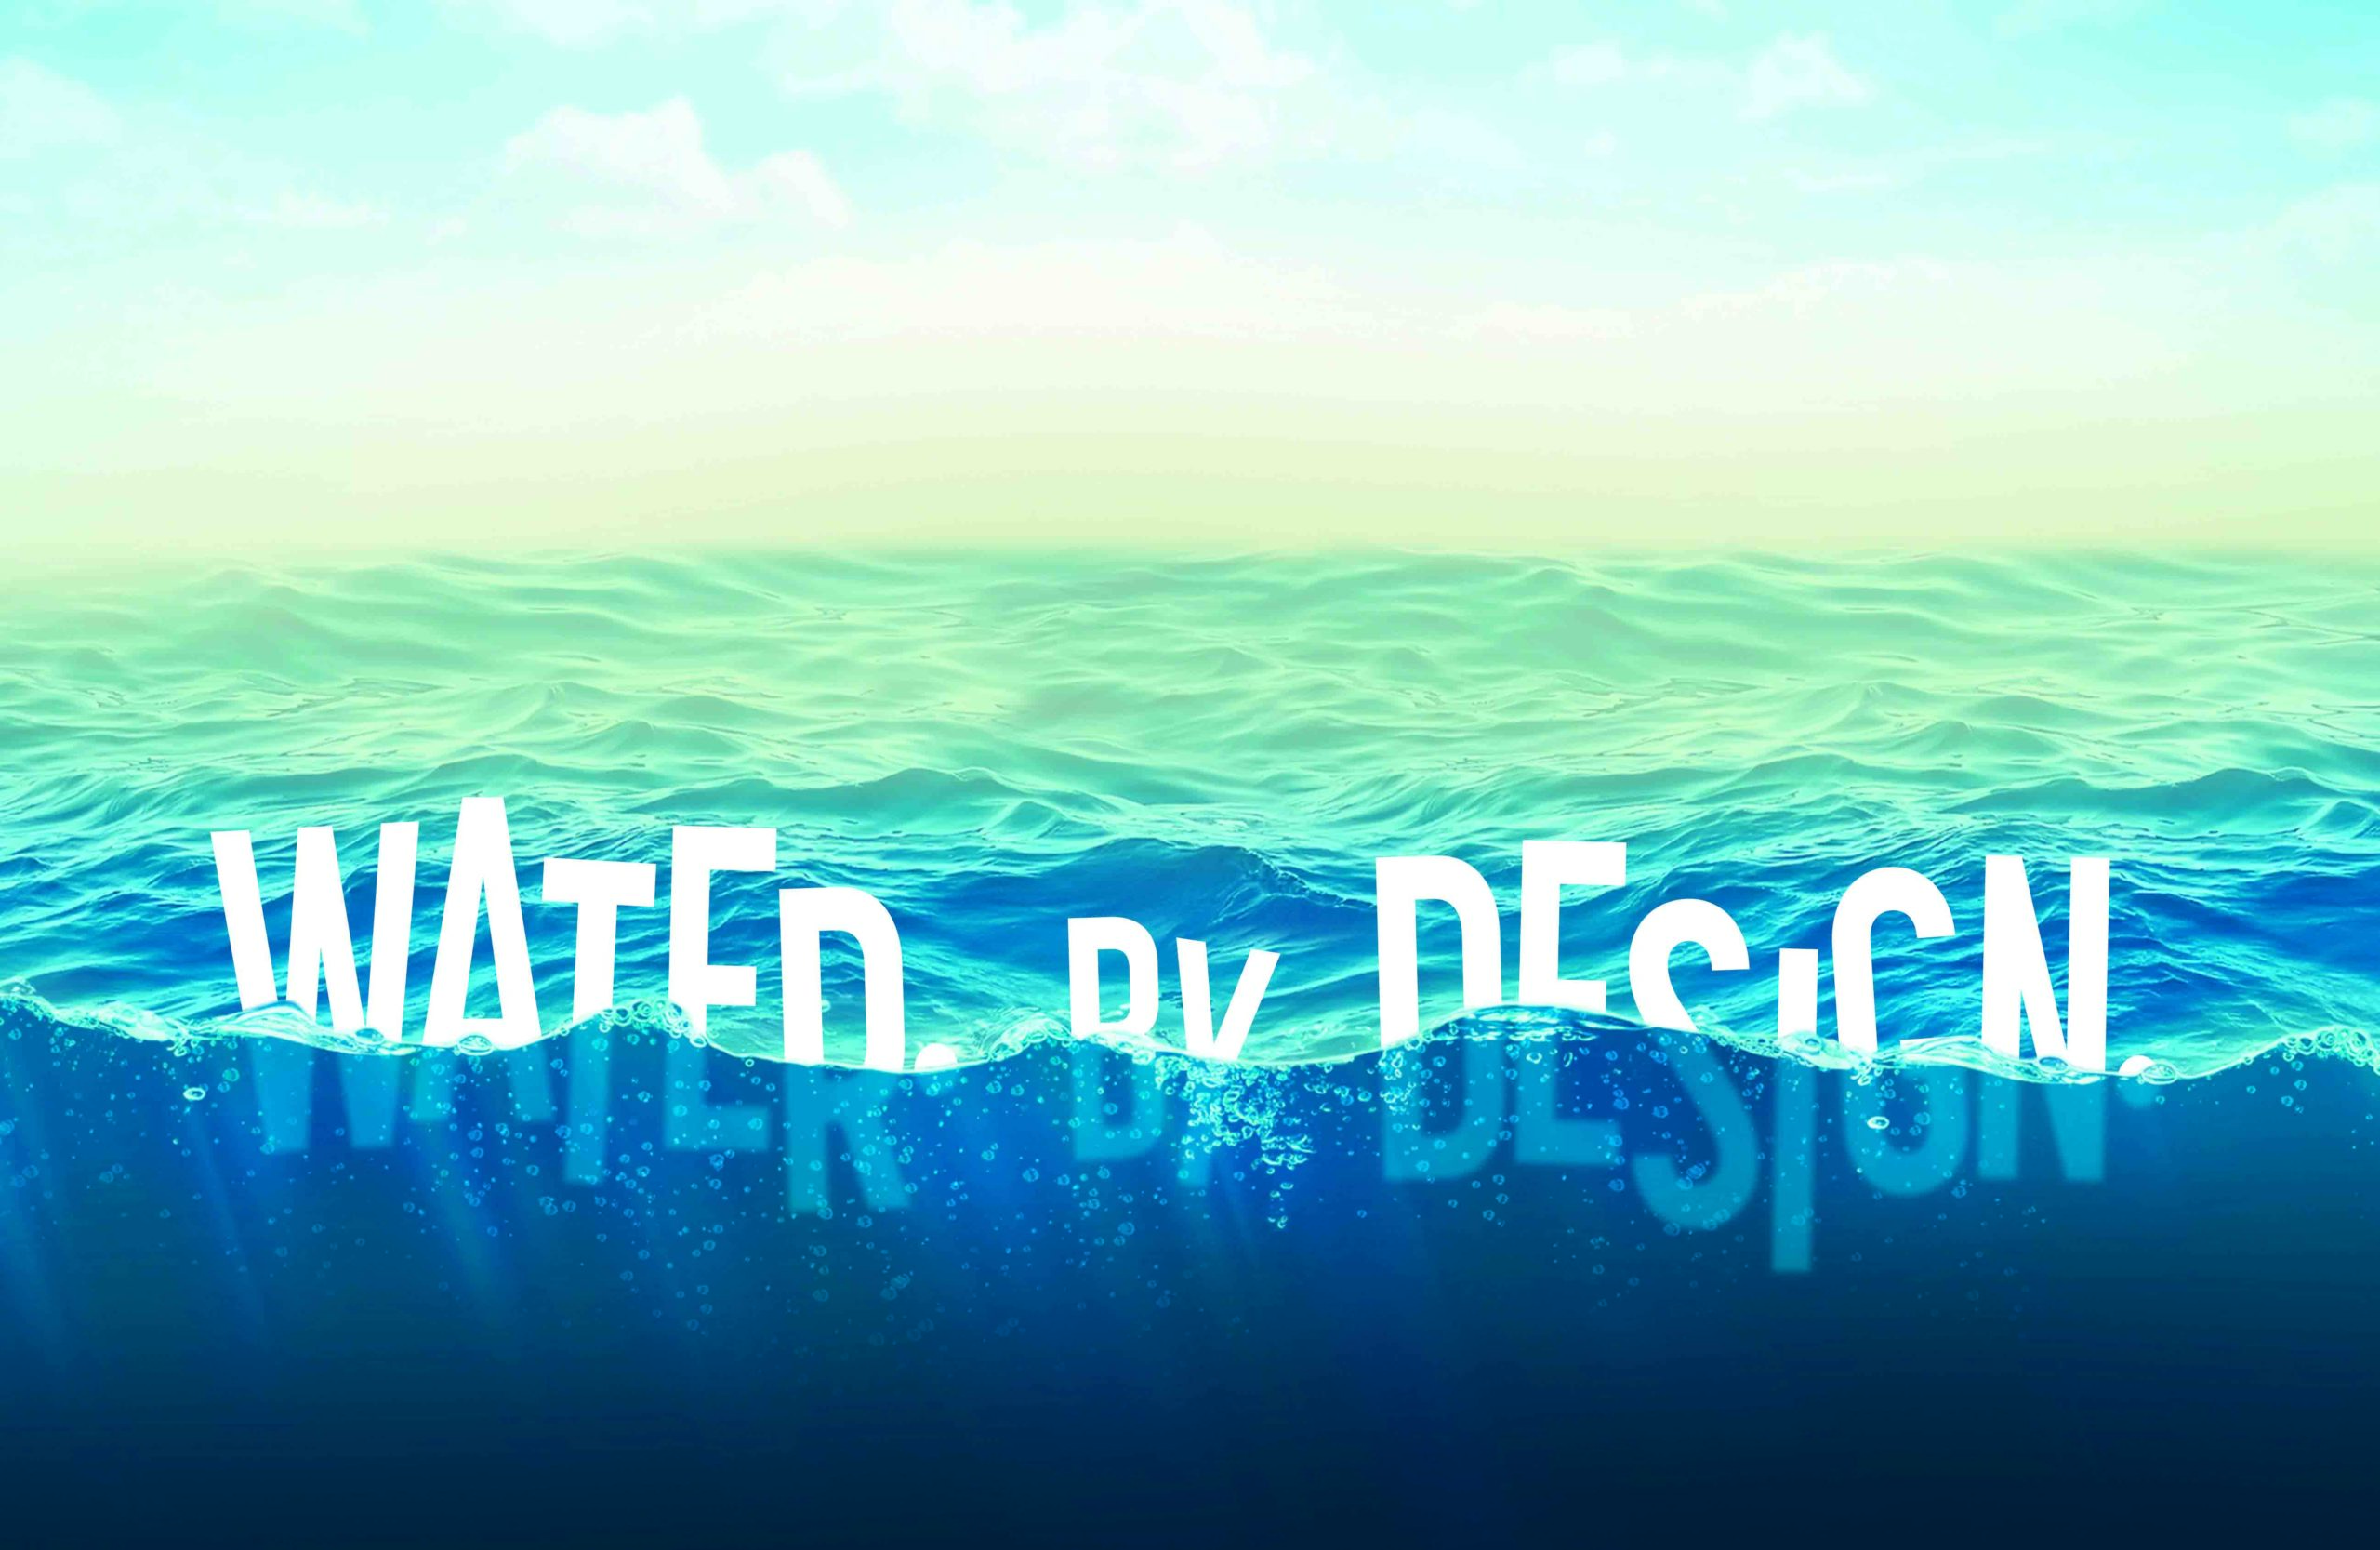 White letters floating in blue and green water spelling, "Water by Design".